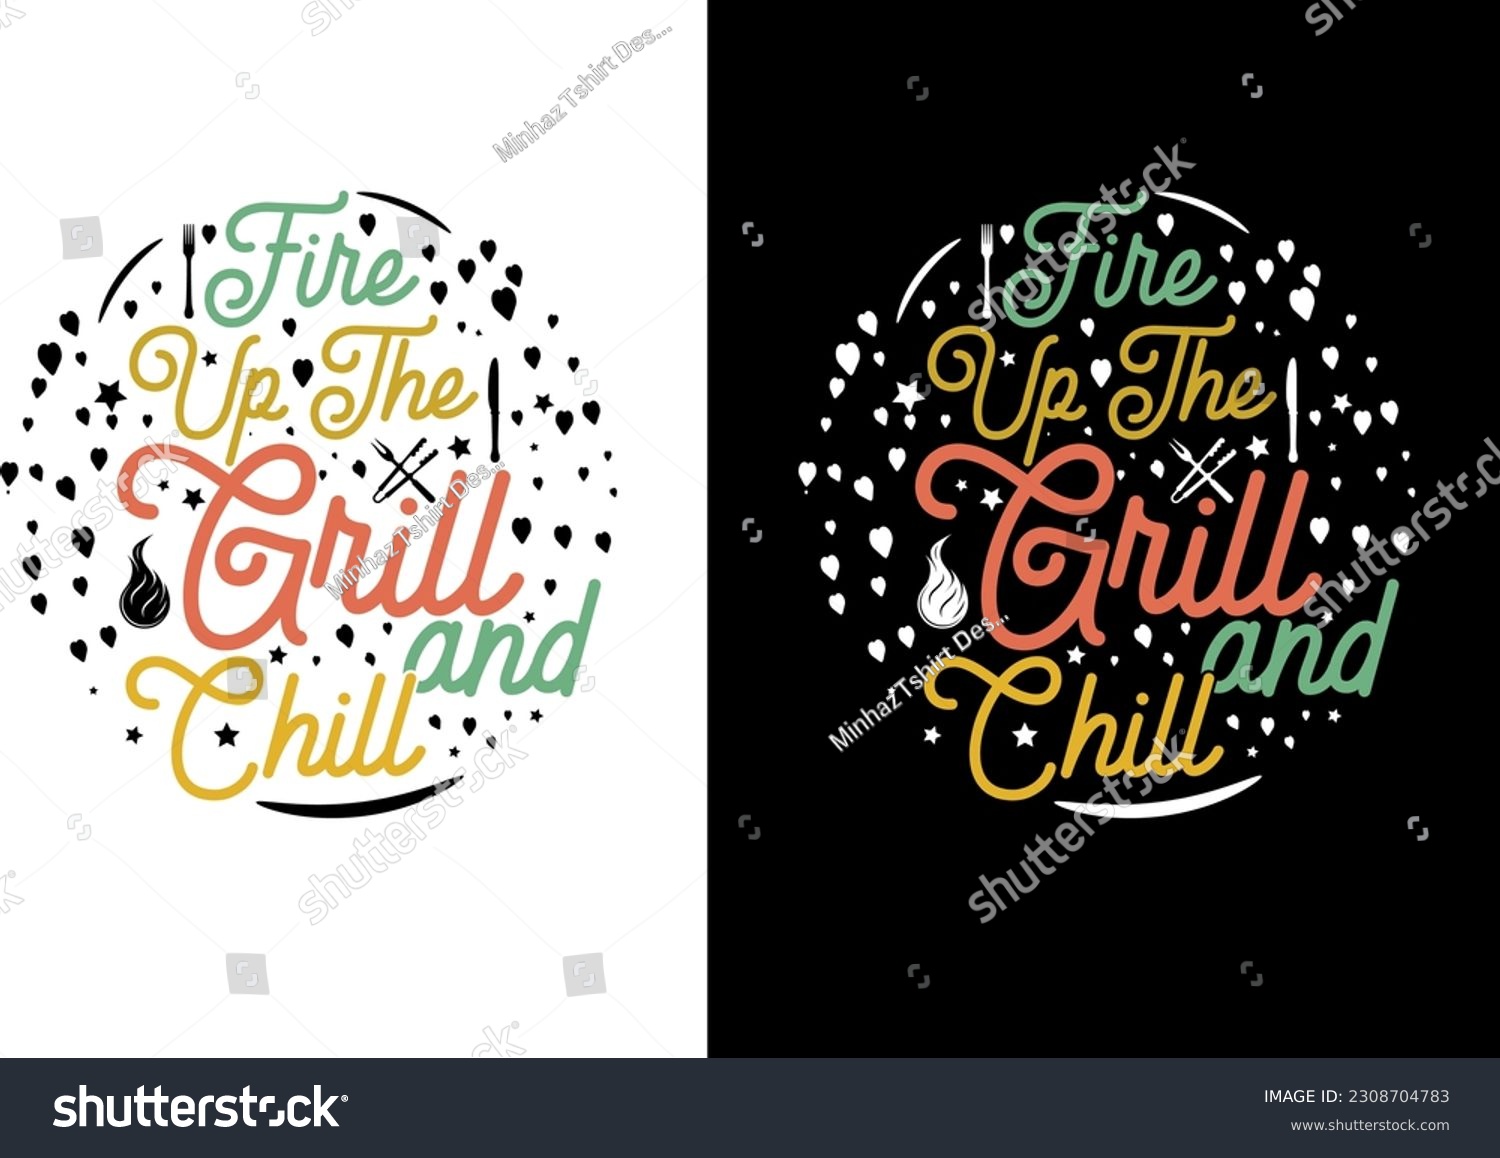 SVG of Fire up the grill and chill,  barbecue svg, Grilling svg, bbq timer svg, Chillin and Grillin,  svg